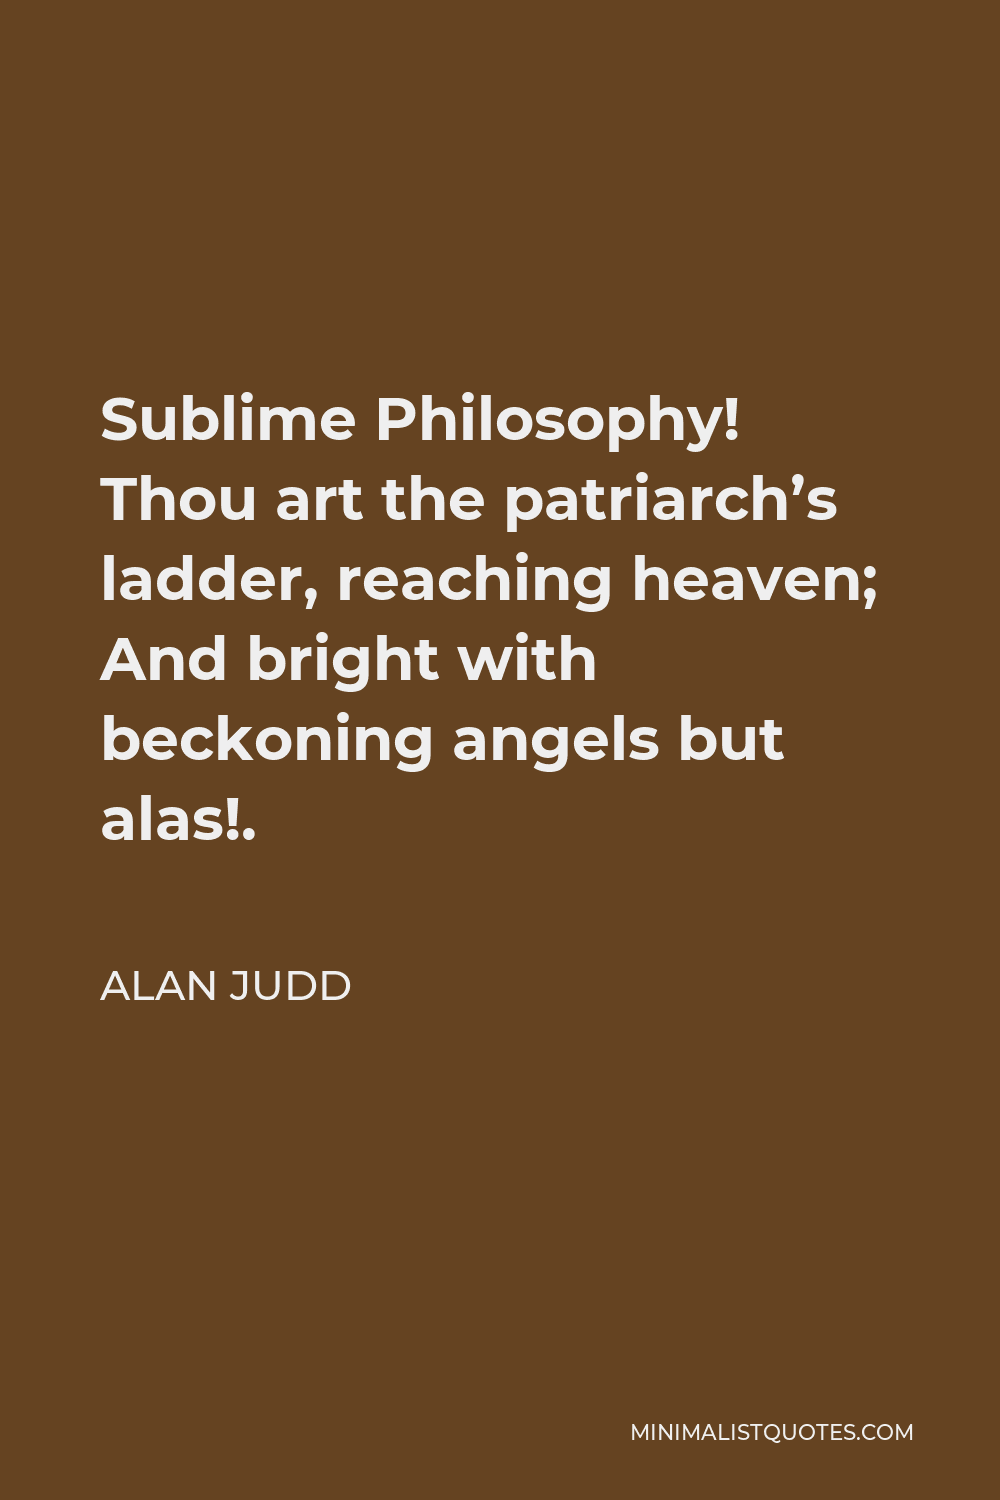 Alan Judd Quote - Sublime Philosophy! Thou art the patriarch’s ladder, reaching heaven; And bright with beckoning angels but alas!.